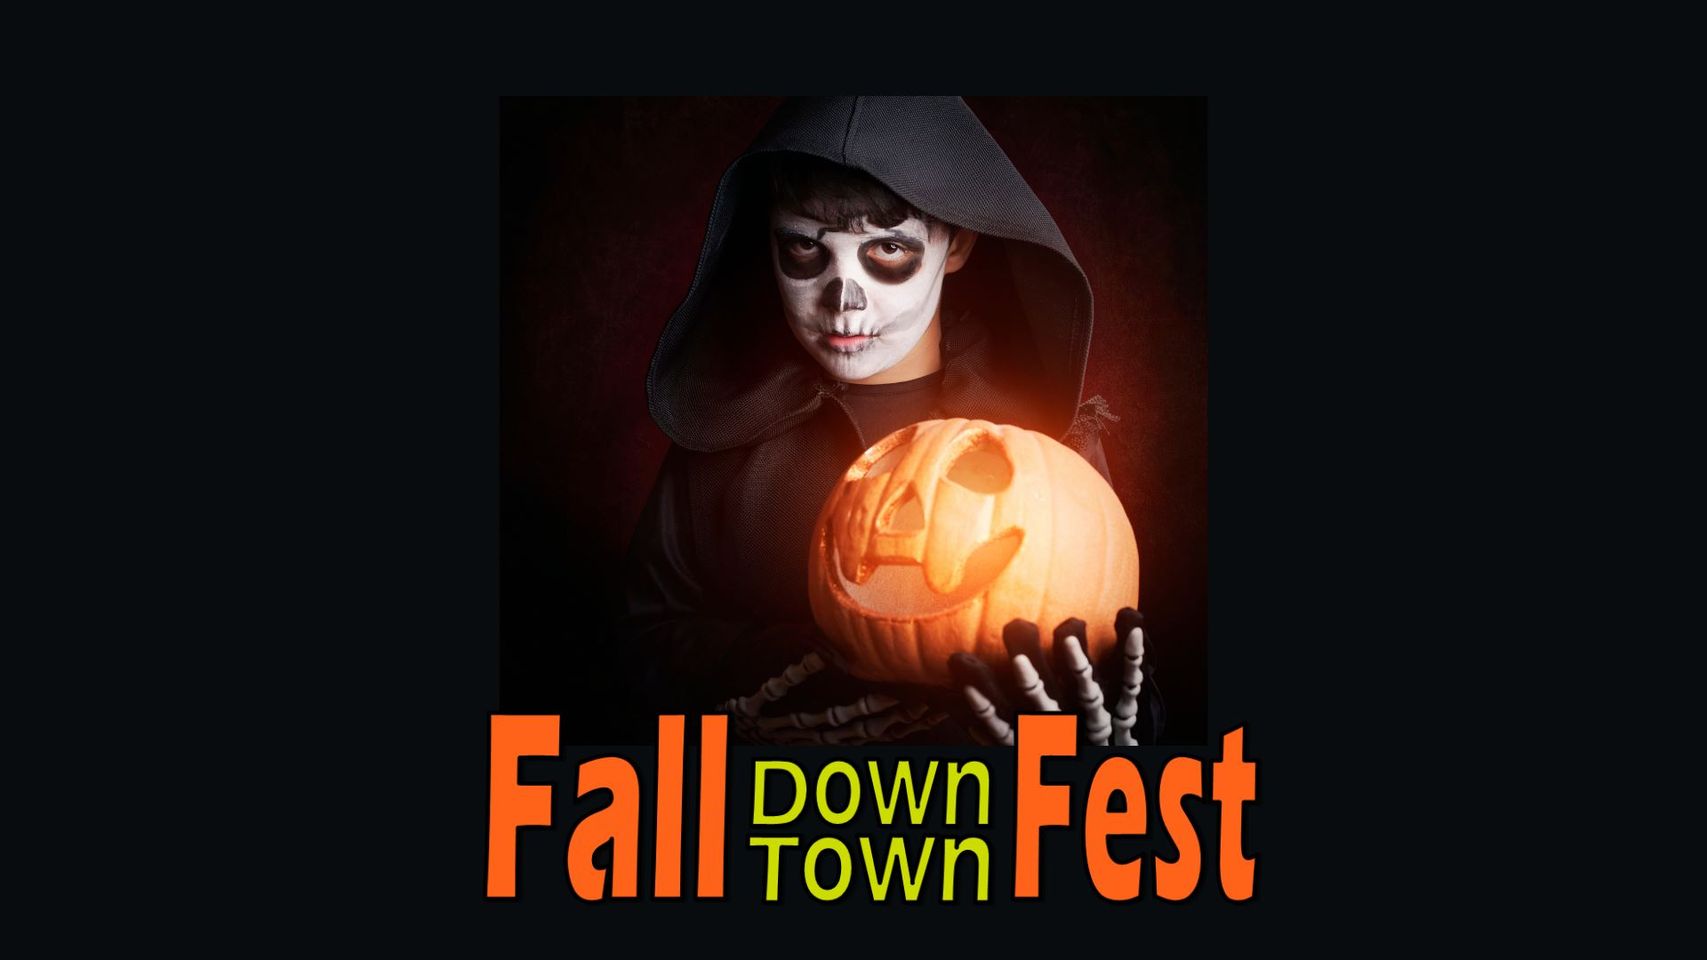 Fall Downtown Fest